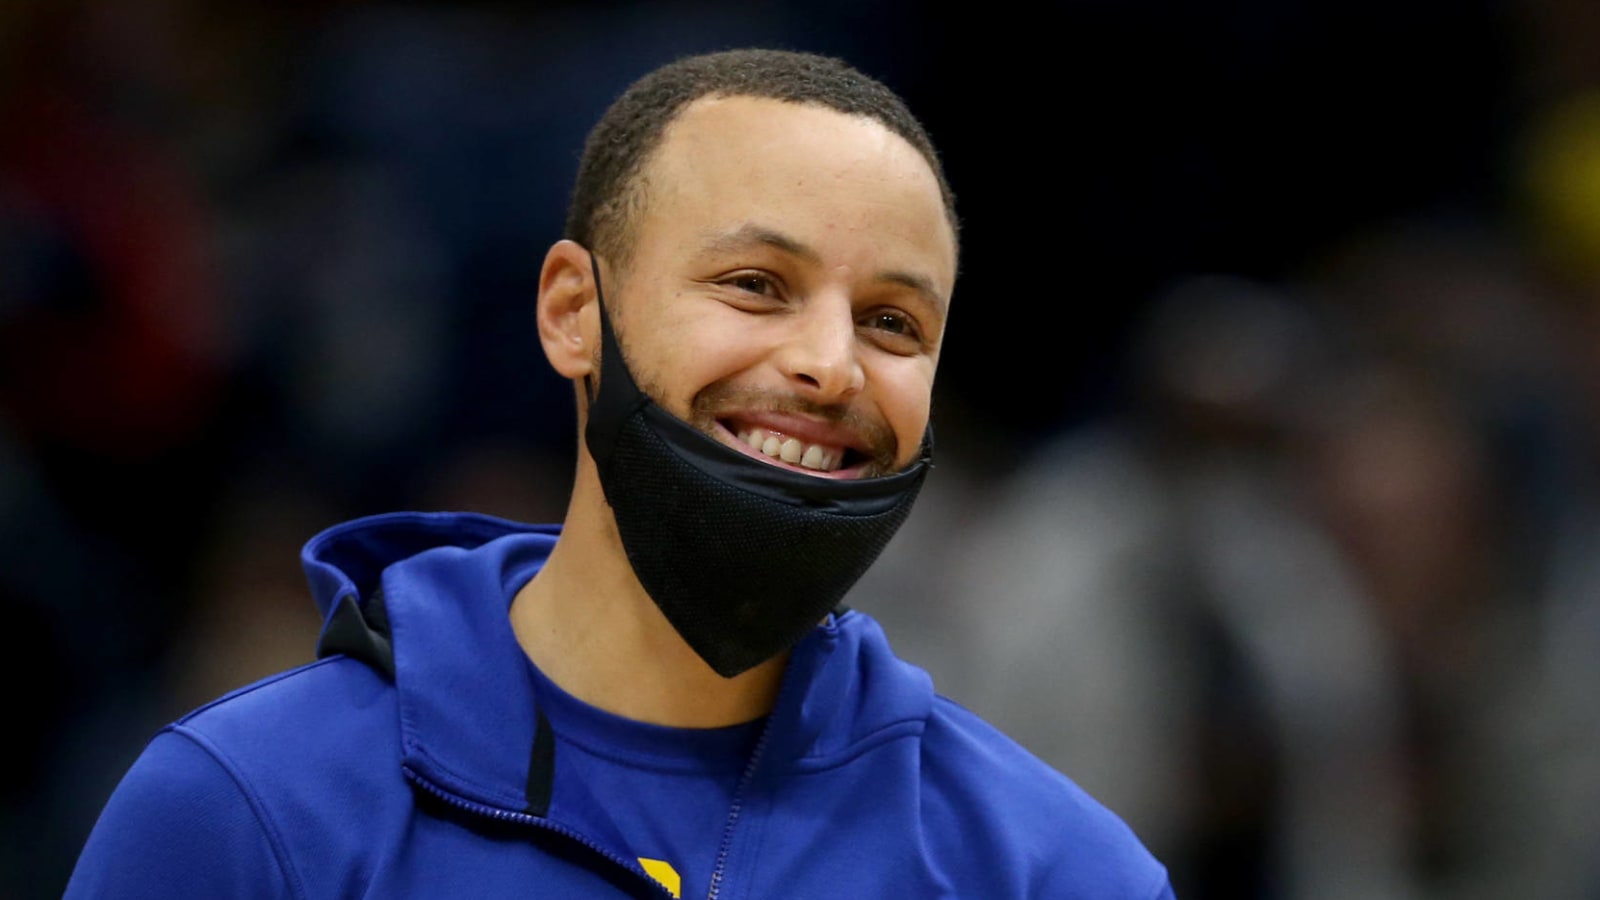 Steph Curry has bold claim about how his Warriors would do against MJ’s Bulls